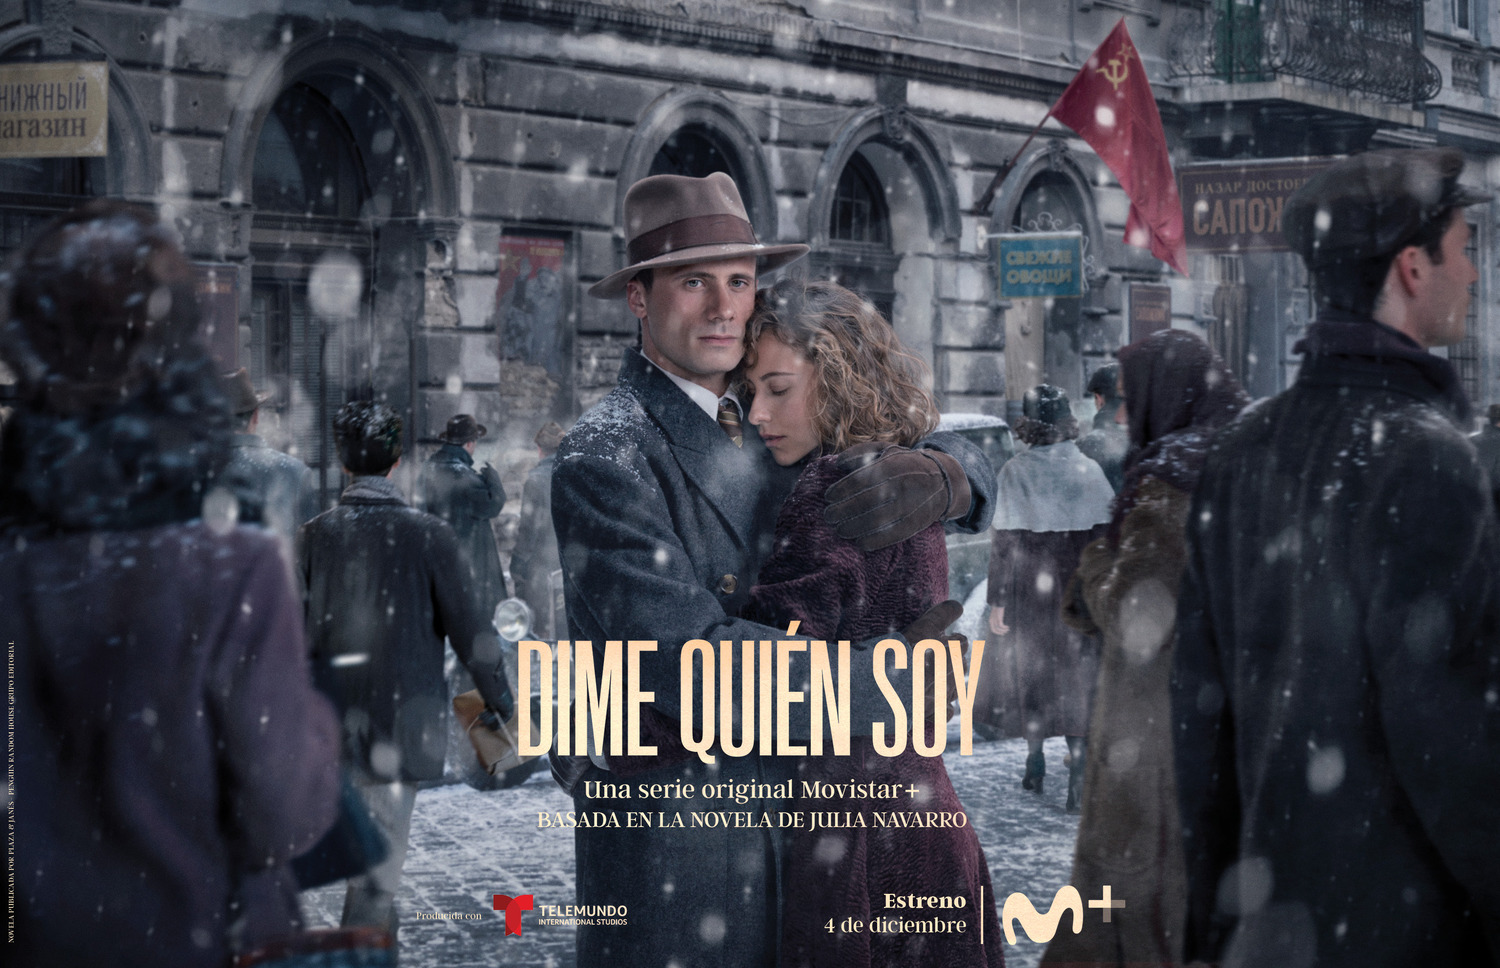 Extra Large TV Poster Image for Dime quién soy (#5 of 6)